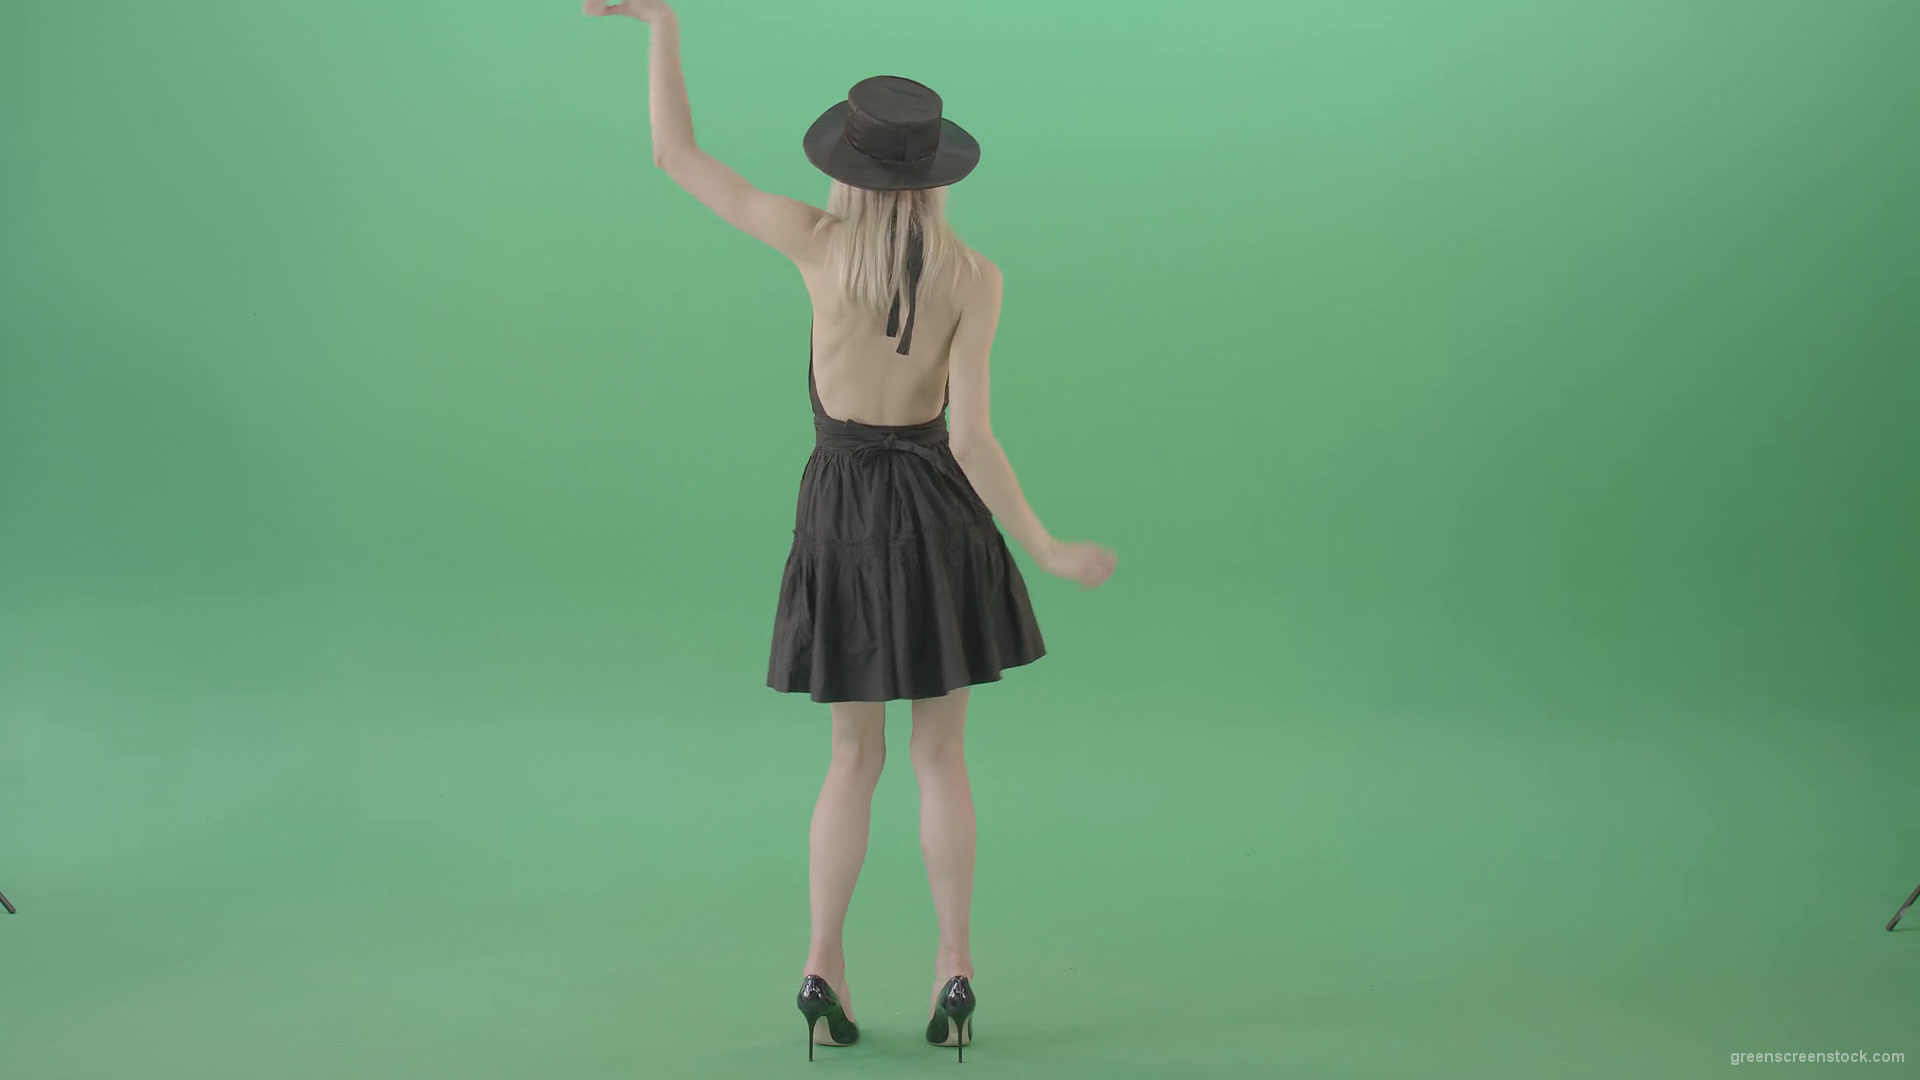 Sexy-blonde-girl-dancing-in-black-fashion-wear-dress-isolated-on-chromakey-Green-Screen-Video-Footage-1920_006 Green Screen Stock